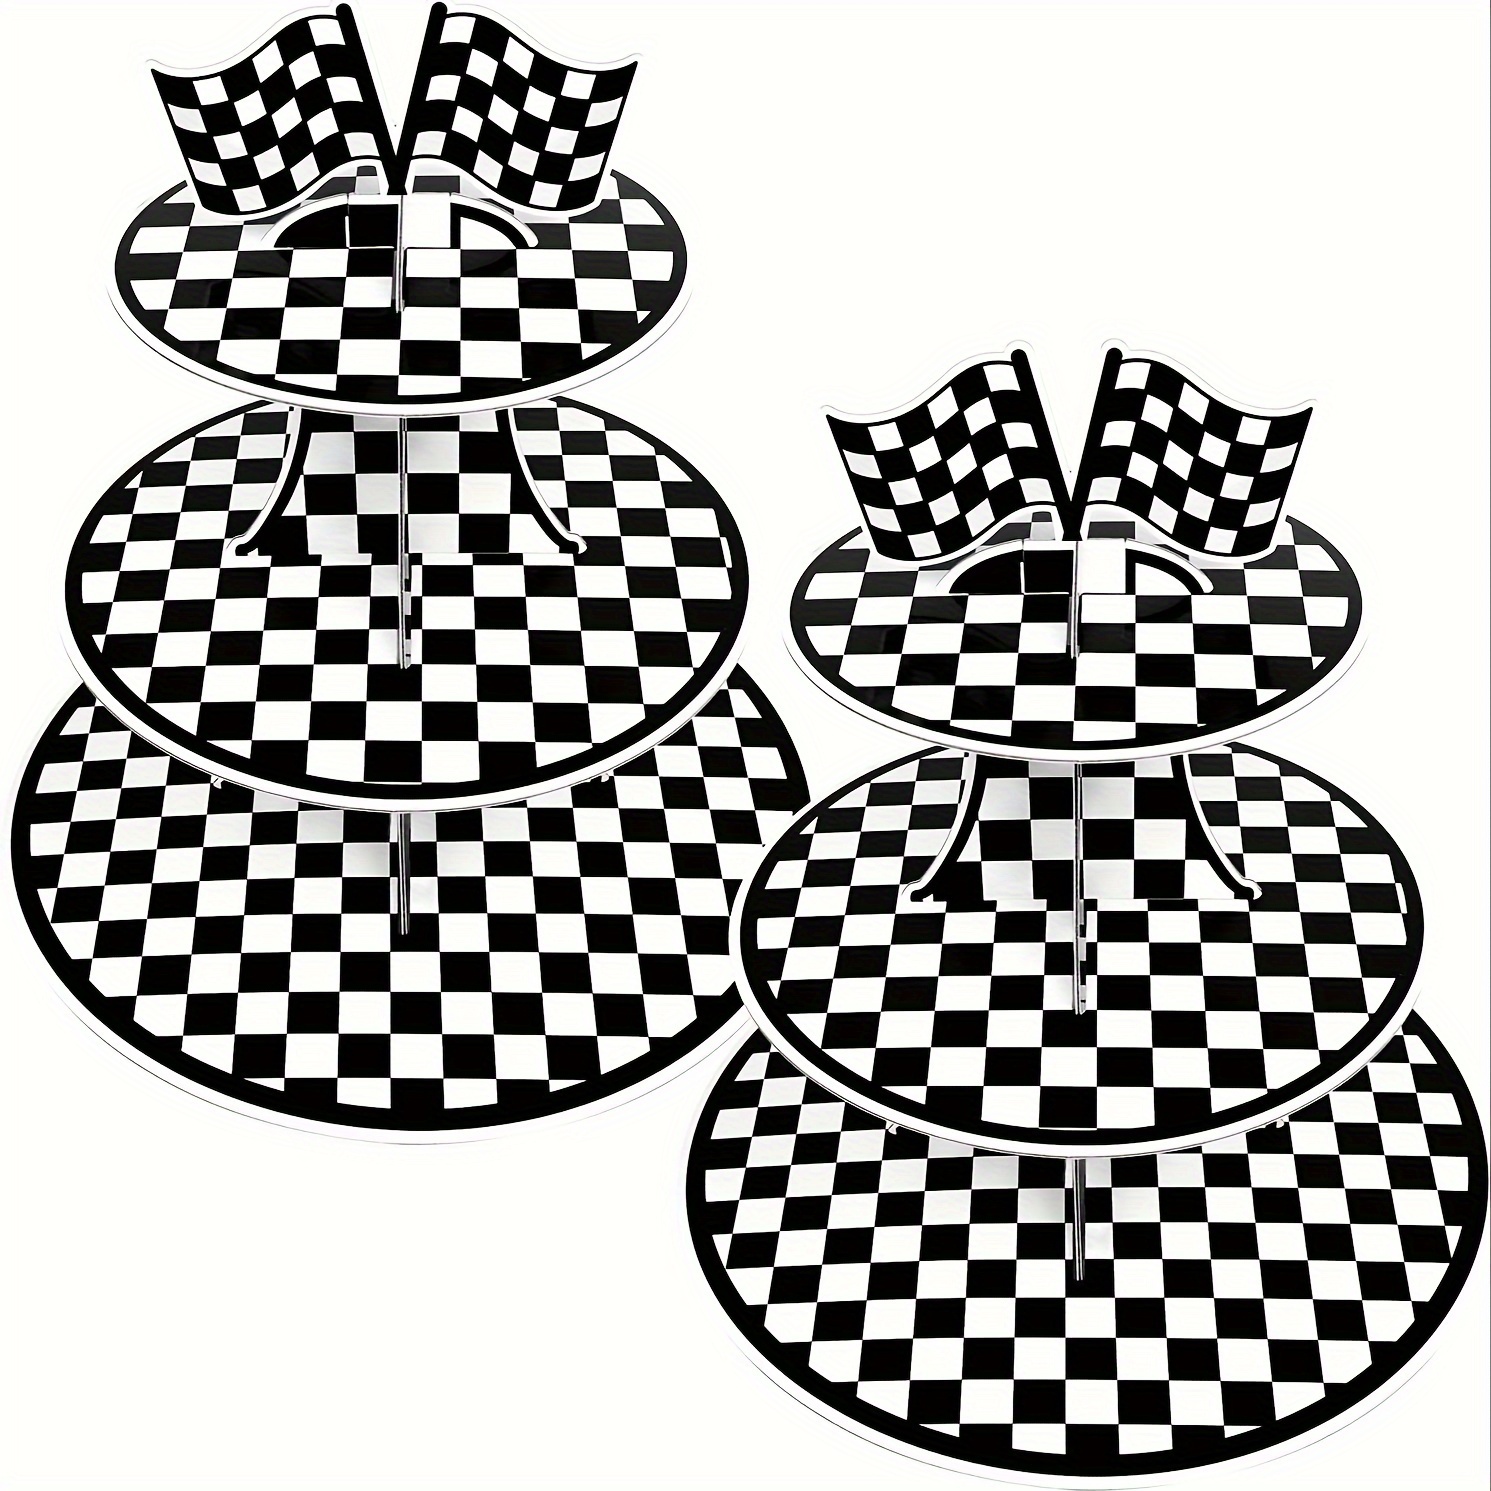 

2pcs, 3-tier Round Cardboard Cupcake Stand, Racing Car Theme Party, Perfect For Racing Cars Birthday Party Supplies Black And White Plaid Cupcake Stand Holder, Checkered Party Decorations